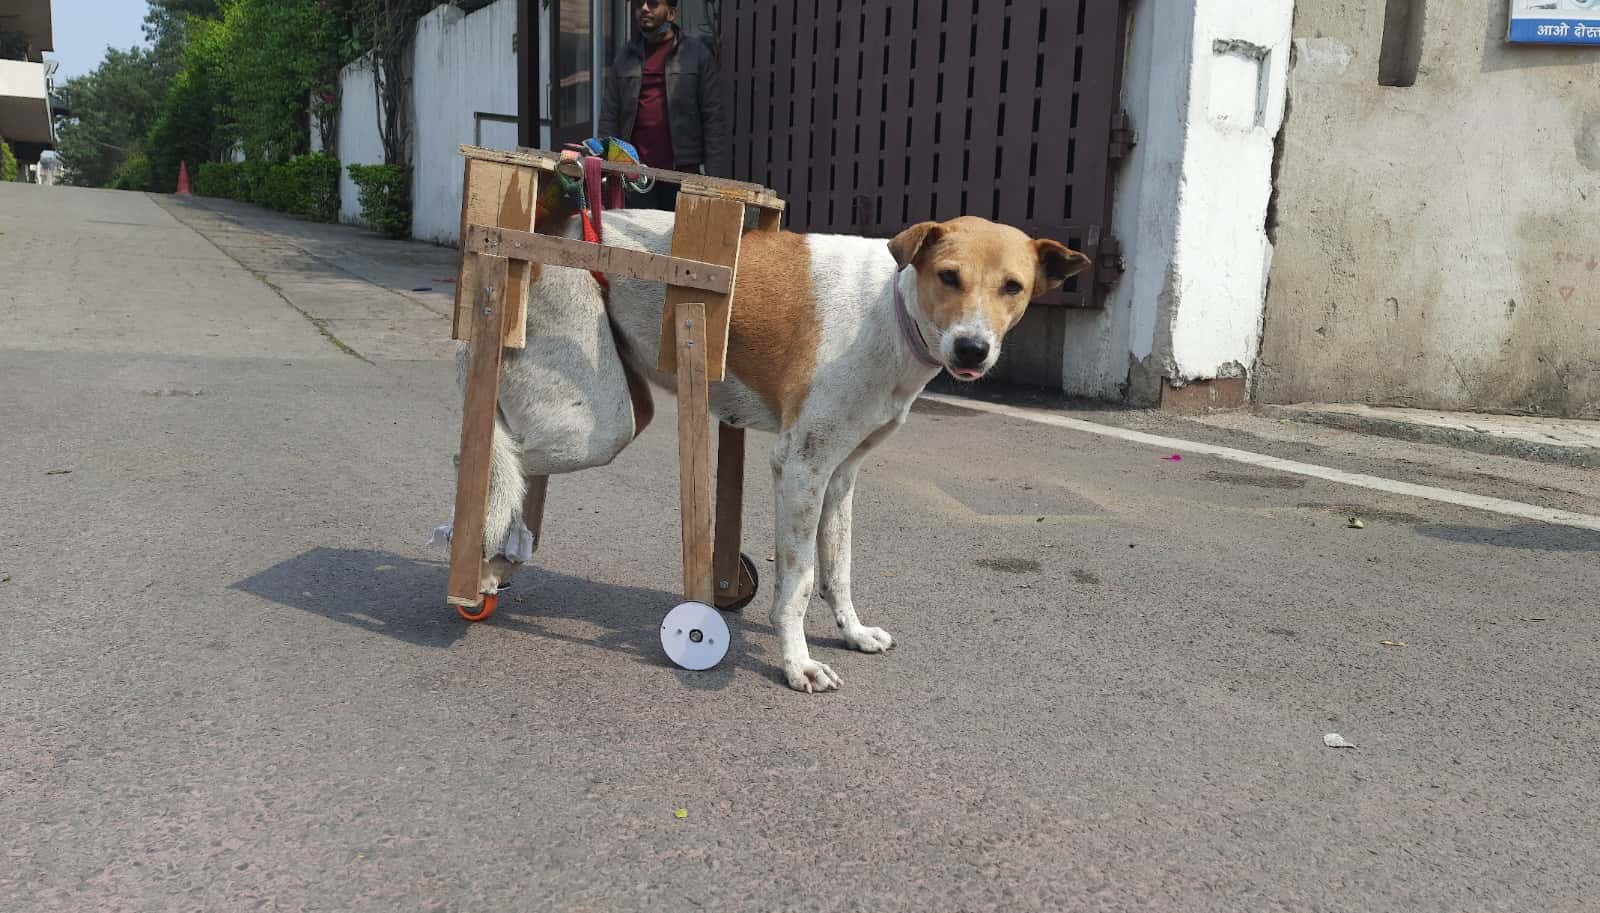 Rajiv made wheelchairs for dogs